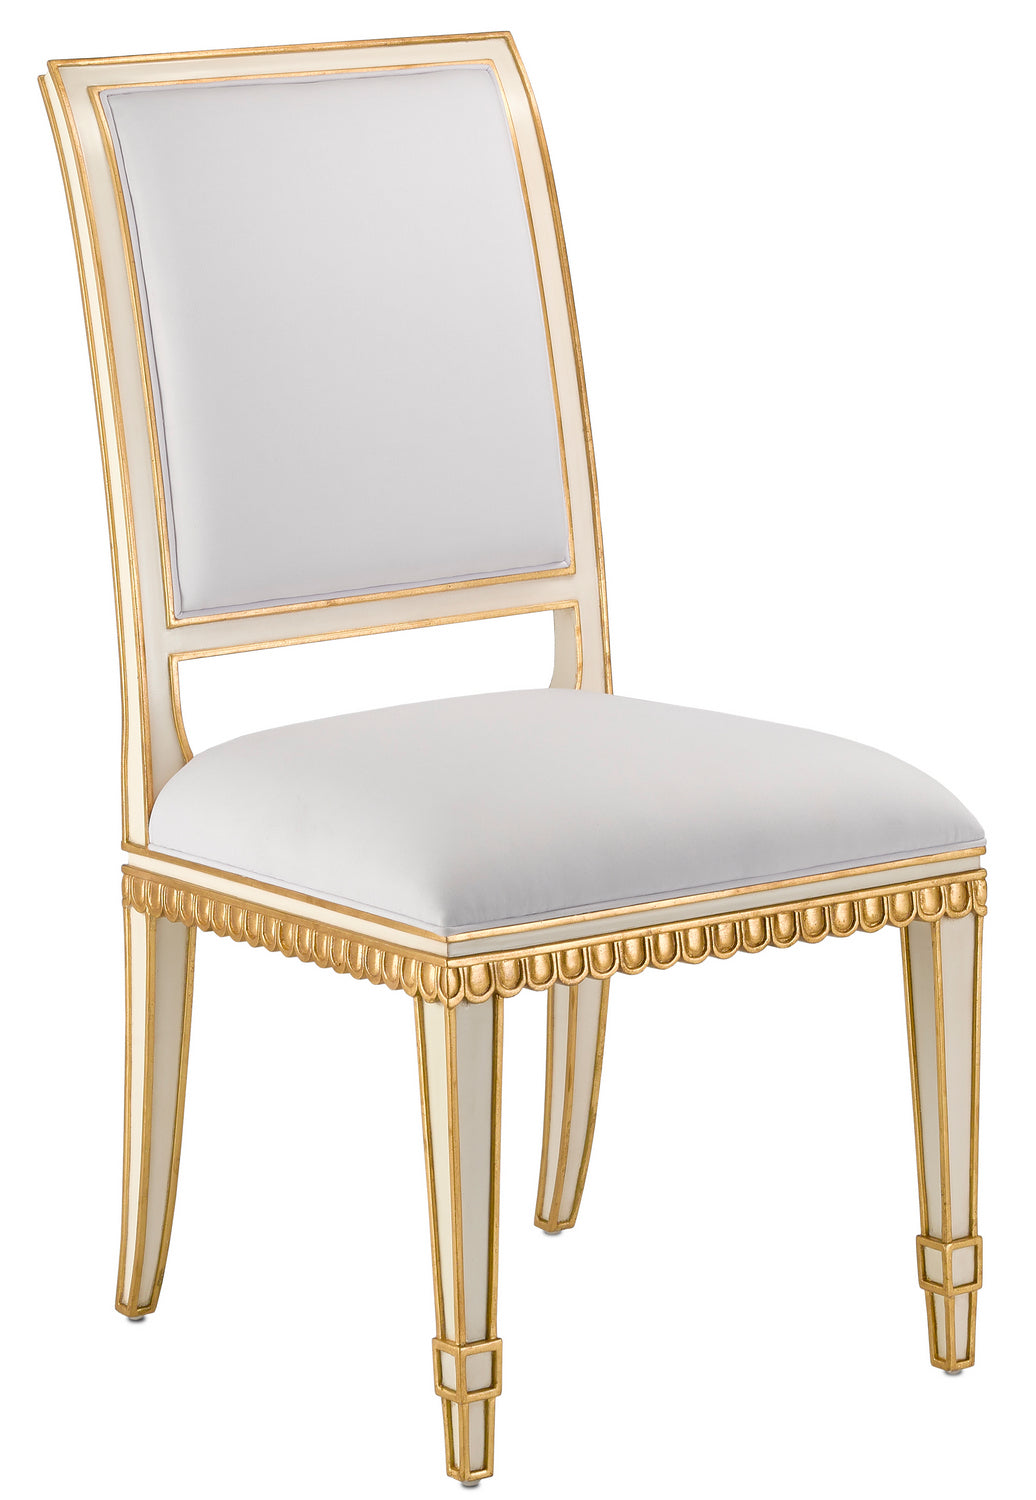 Chair from the Ines collection in Ivory/Antique Gold finish